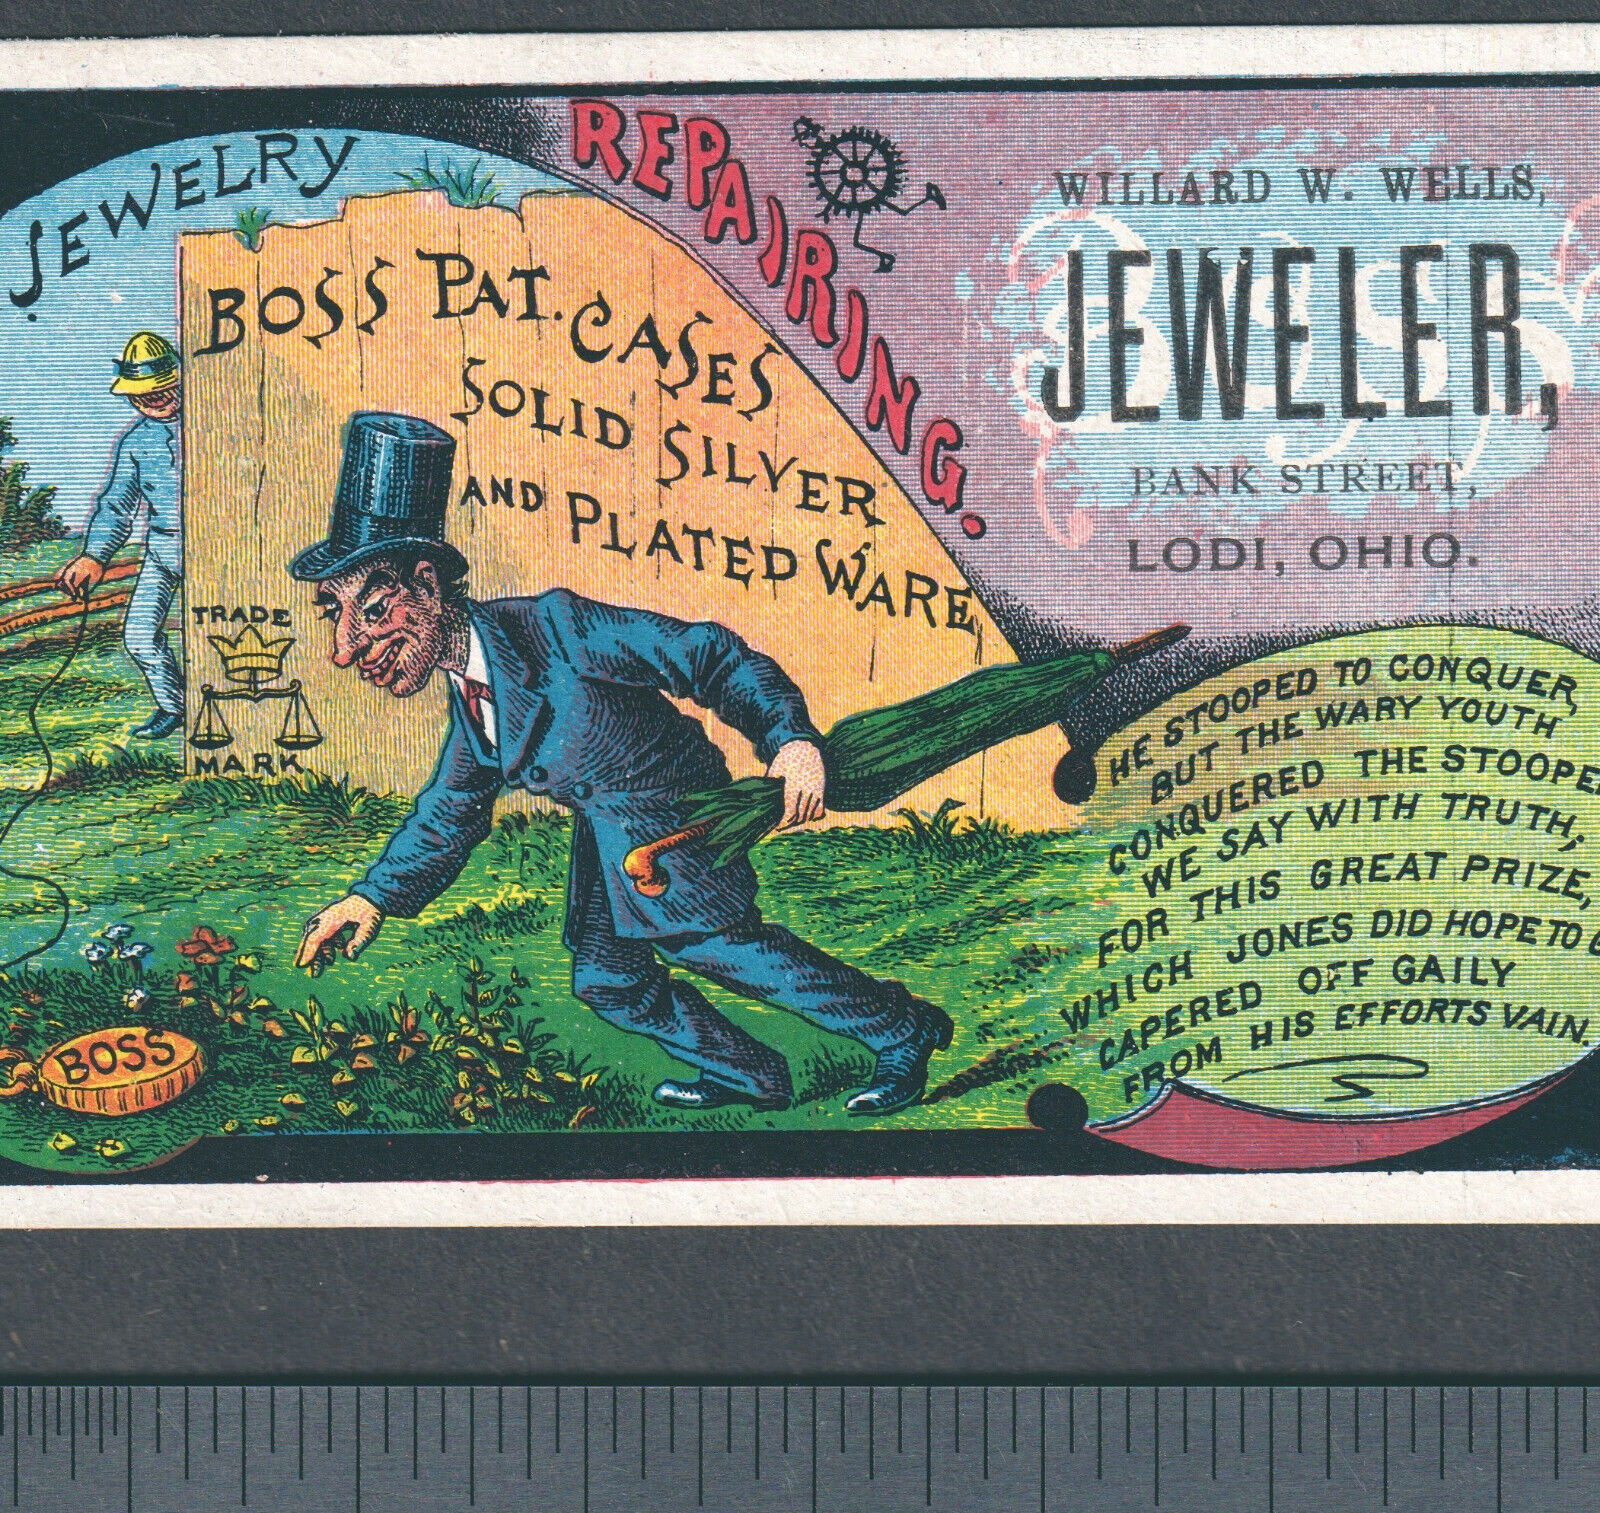 Lodi Ohio Willard Wells Jewelry Store OH Boss Watch Stoops to Conquer Trade Card